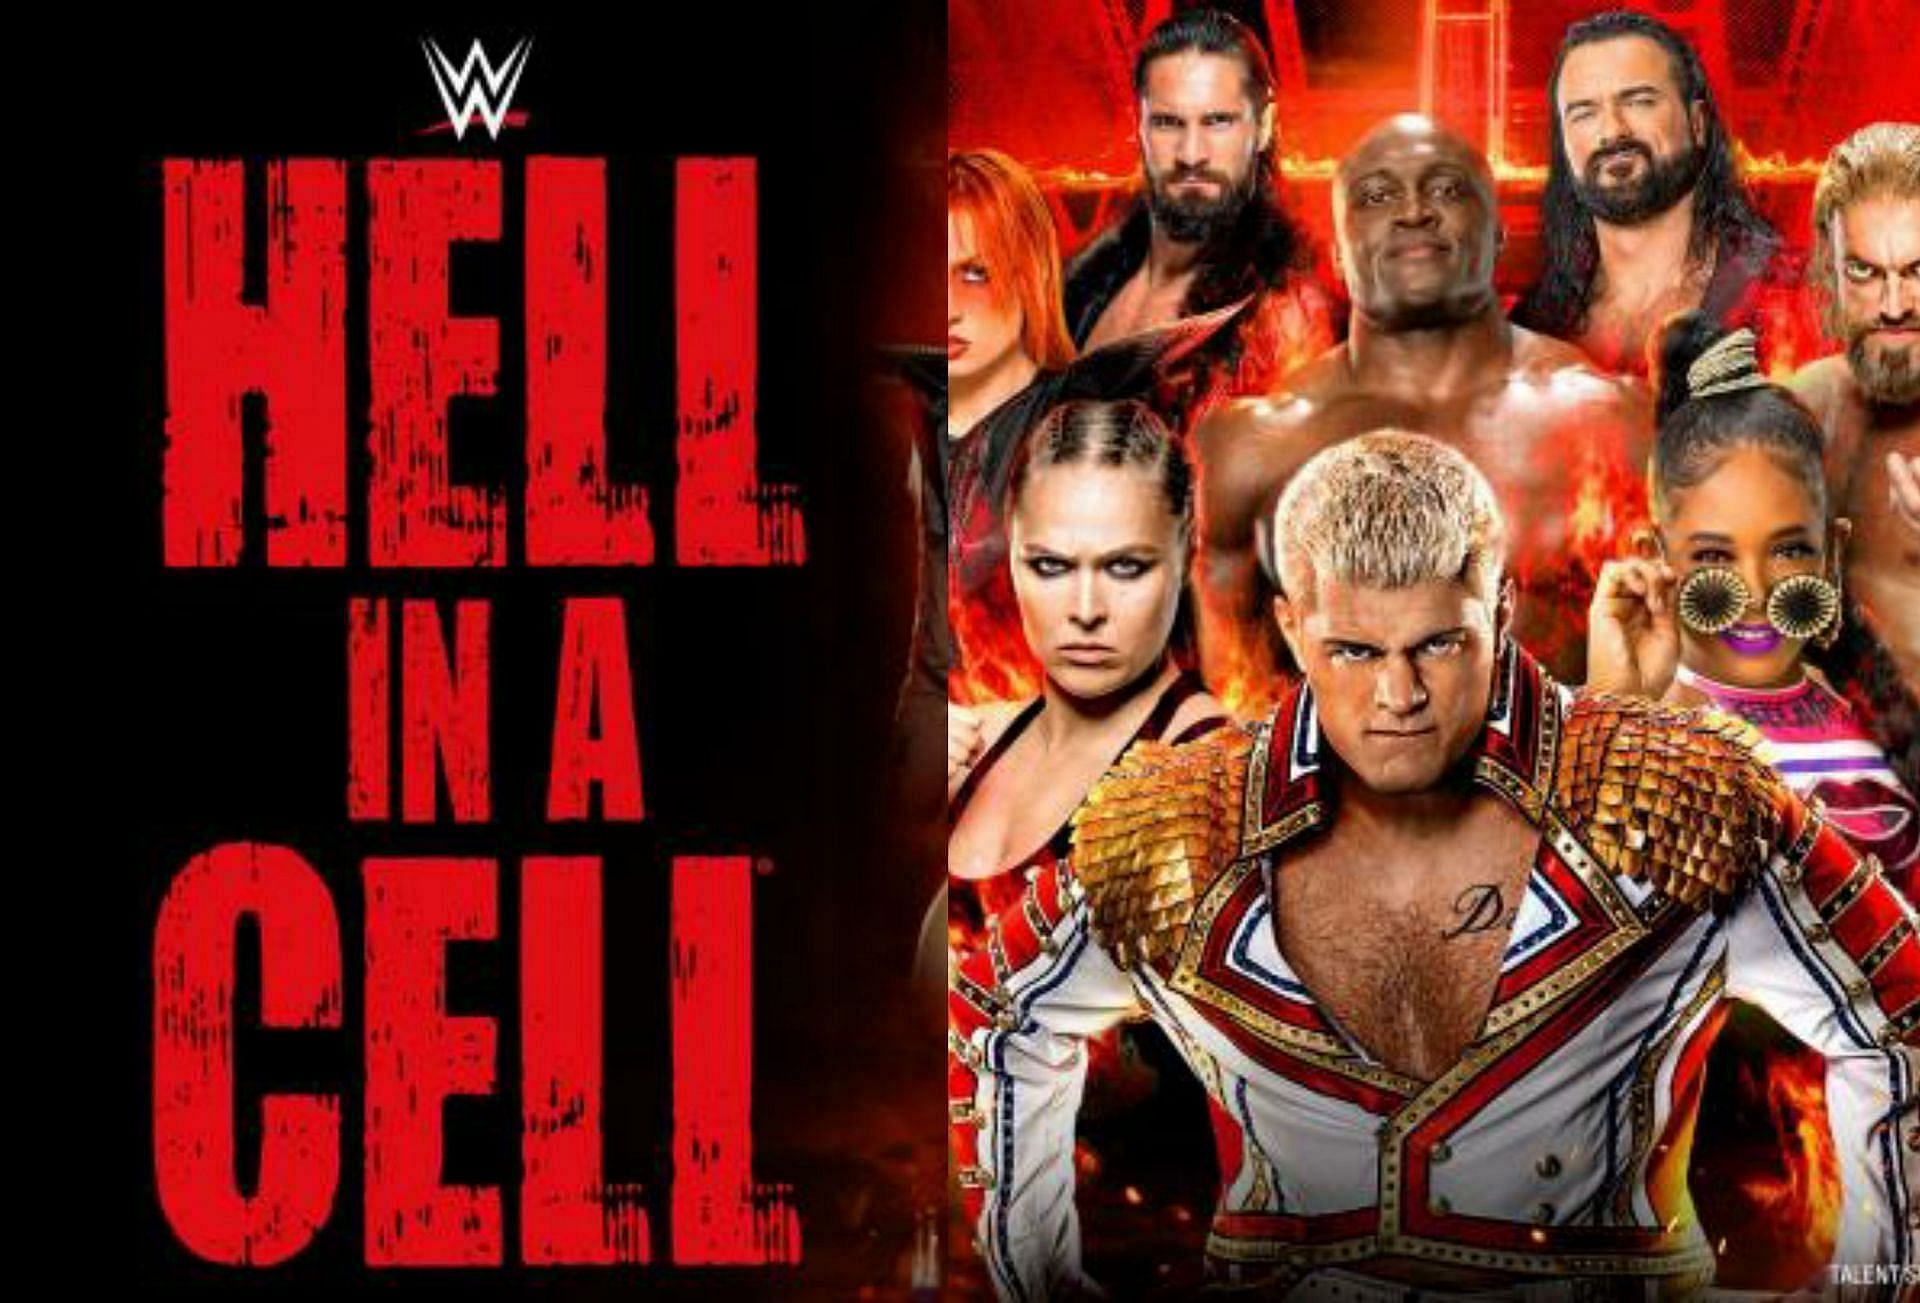 Hell in a Cell 2022 is just one week away